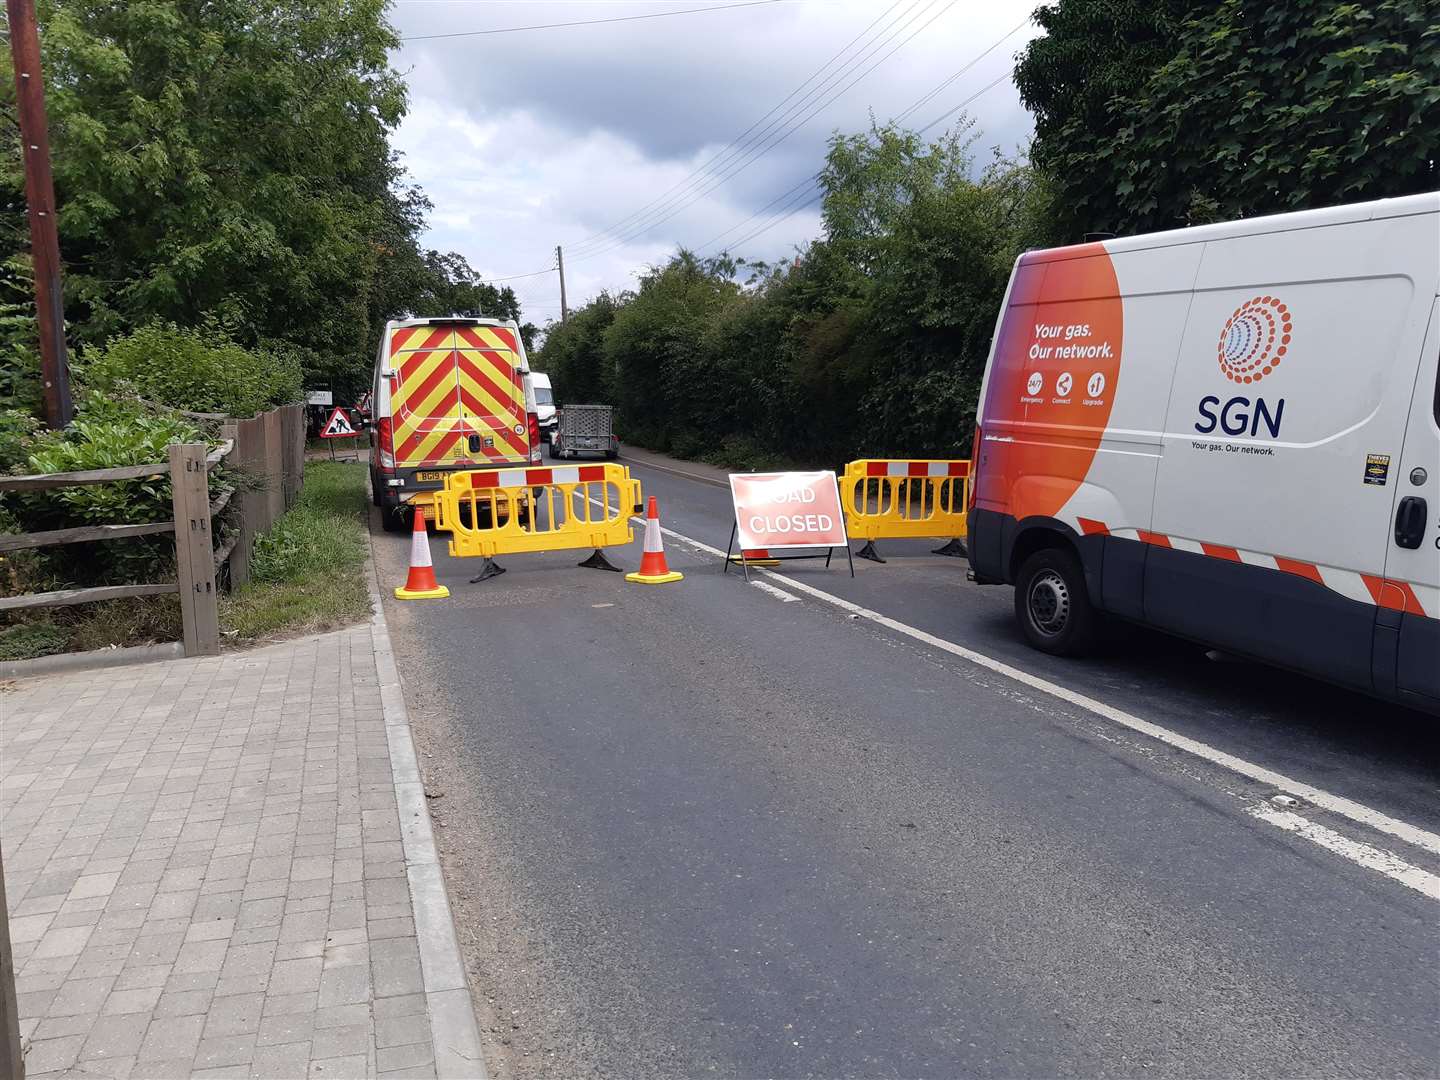 Maidstone Road near Sutton Valence is still closed after a gas main fire